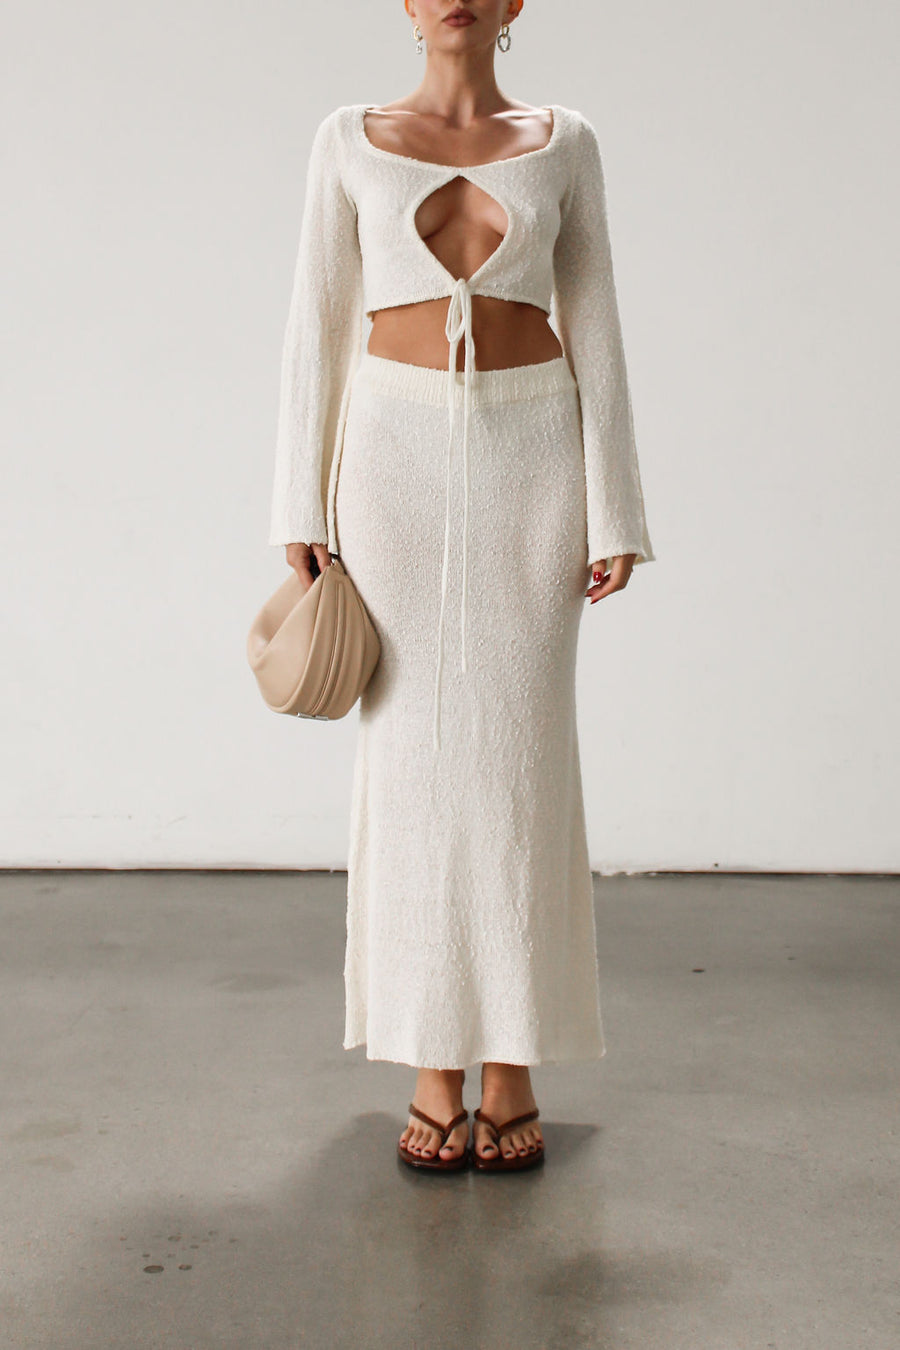 Cream maxi skirt set with long sleeve crop top.TOP: Textured crochet knit crop top. Long bell sleeves. Front keyhole and tie closure. Unlined  BOTTOM: Textured crochet knit maxi skirt. Elastic waist. Unlined.